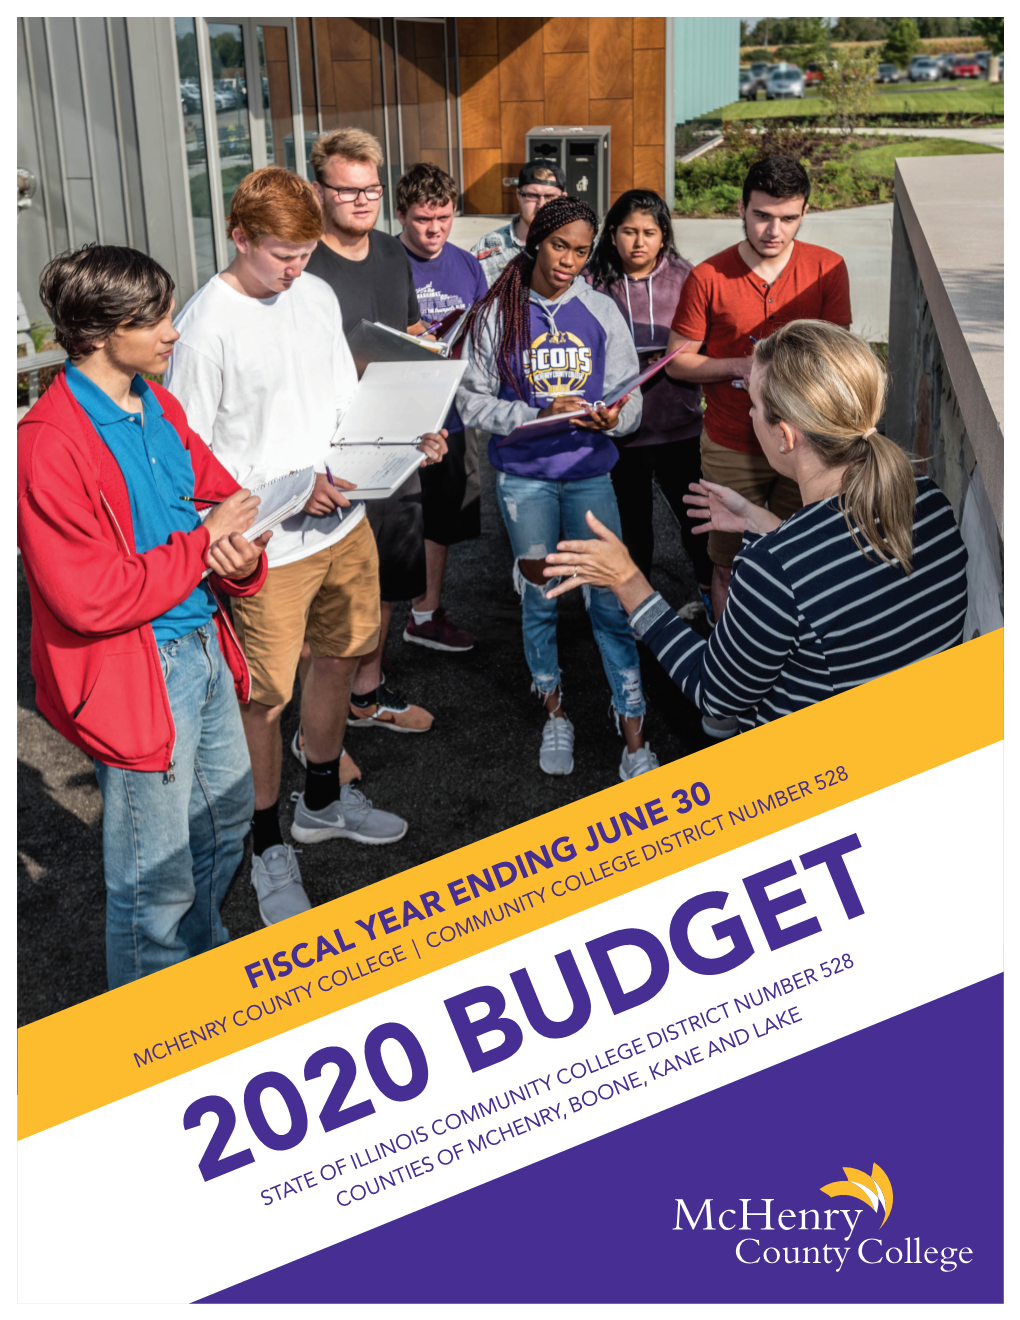 Annual Budget FY 2020